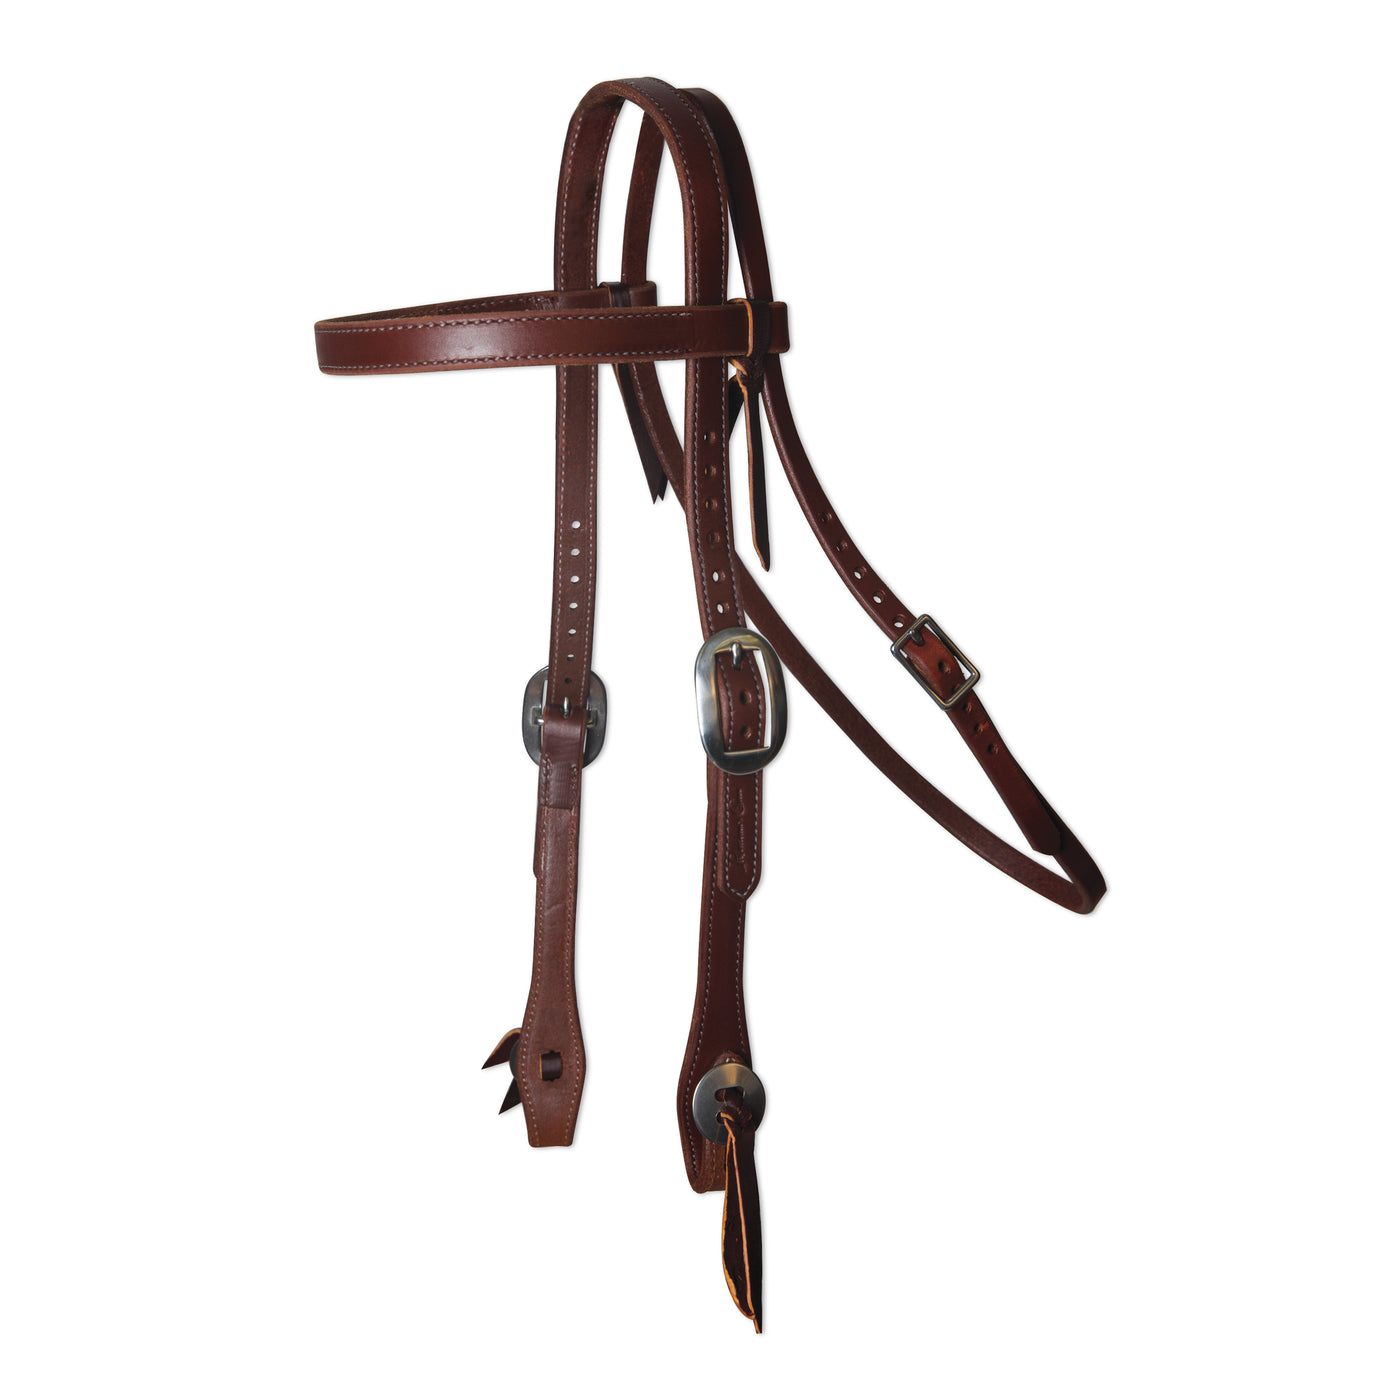 Professional's Choice RH Browband Headstall 3/4 EZ Change